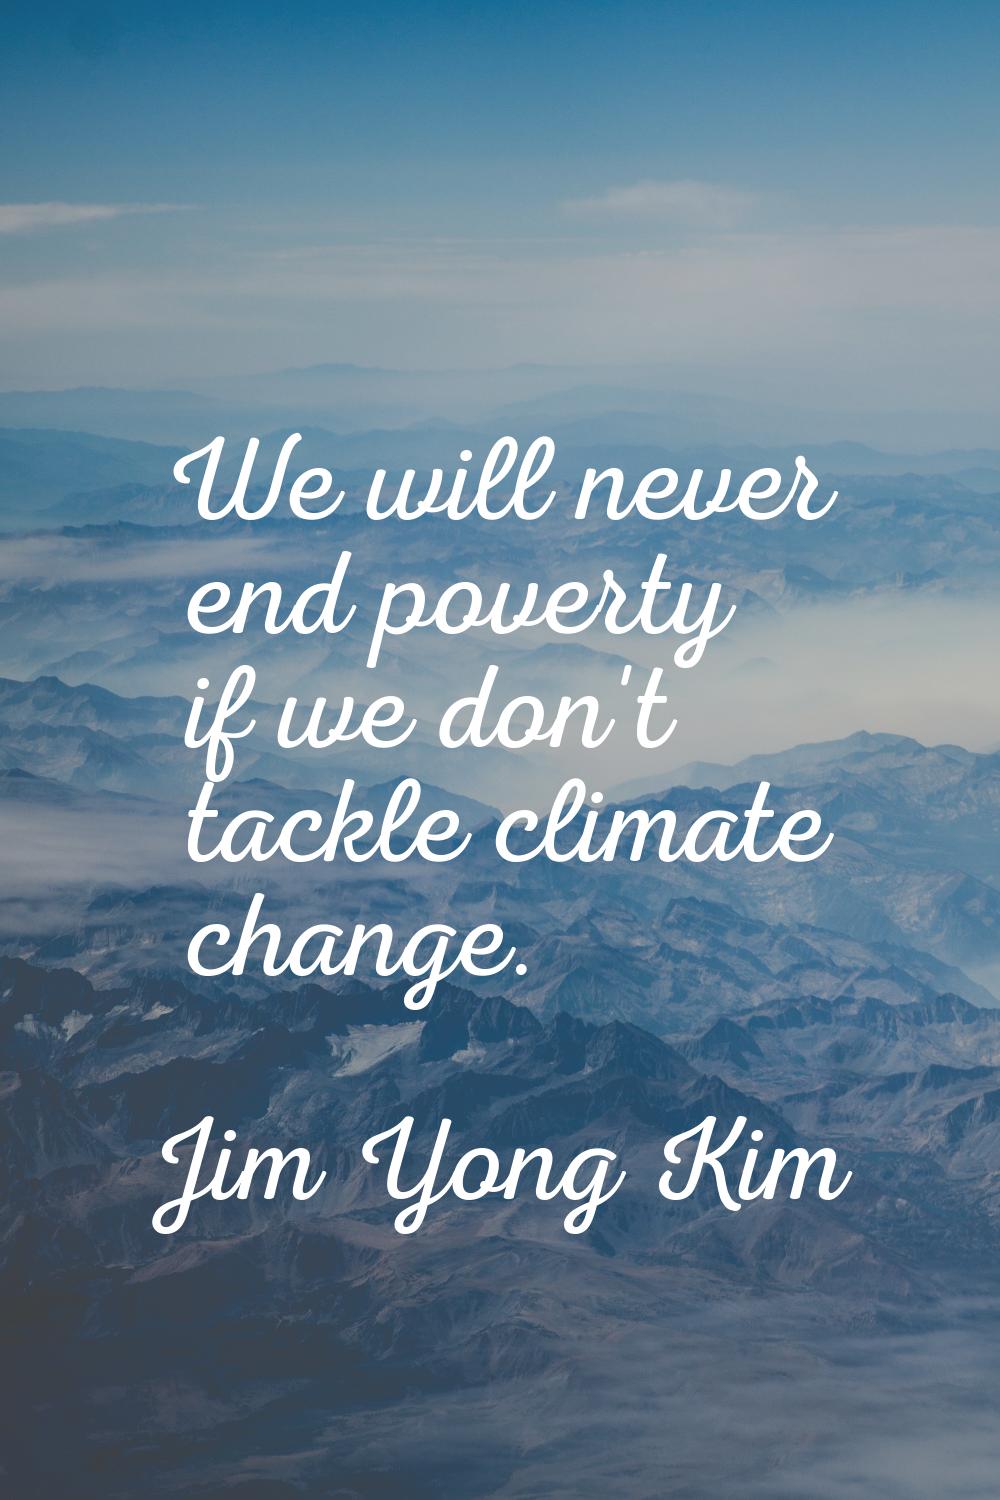 We will never end poverty if we don't tackle climate change.